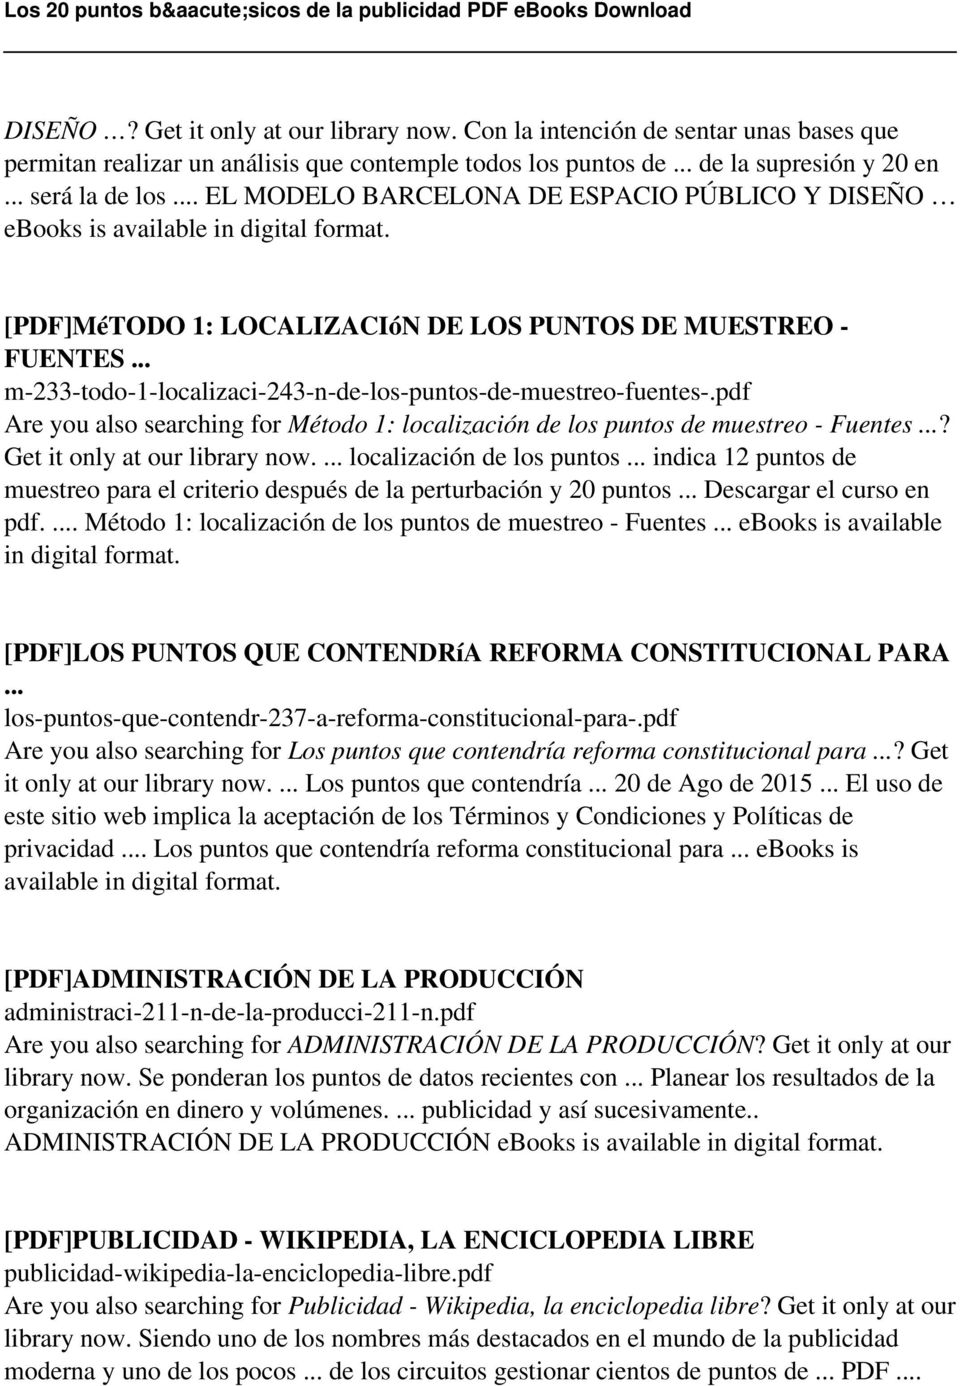 .. m-233-todo-1-localizaci-243-n-de-los-puntos-de-muestreo-fuentes-.pdf Are you also searching for Método 1: localización de los puntos de muestreo - Fuentes...? Get it only at our library now.